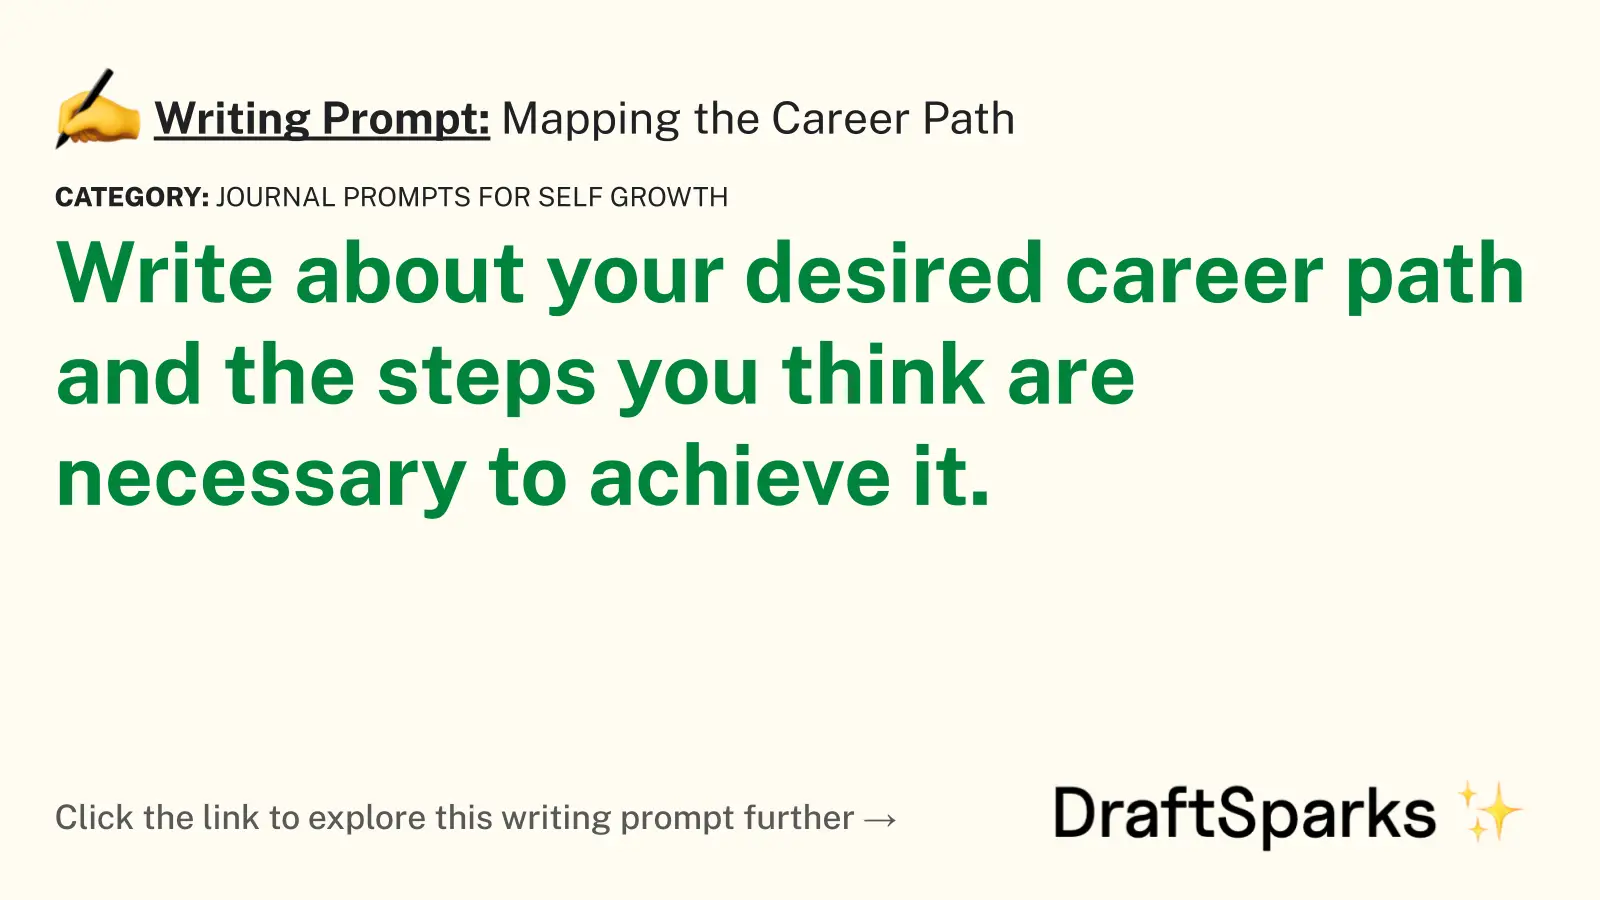 Mapping the Career Path